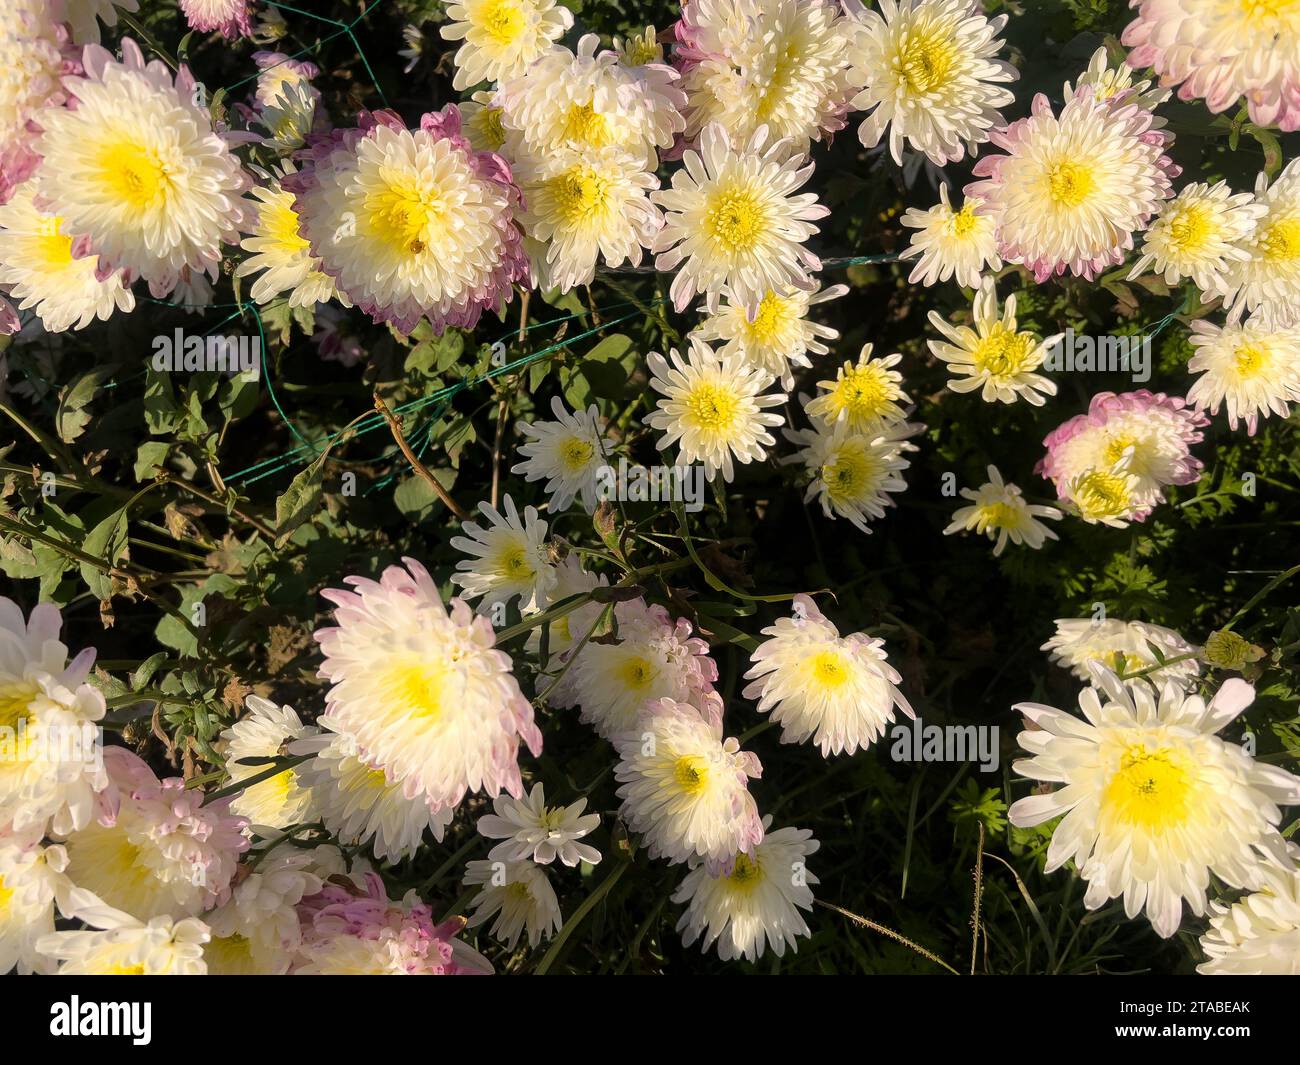 13 Types of Chrysanthemum for a splash of fall color